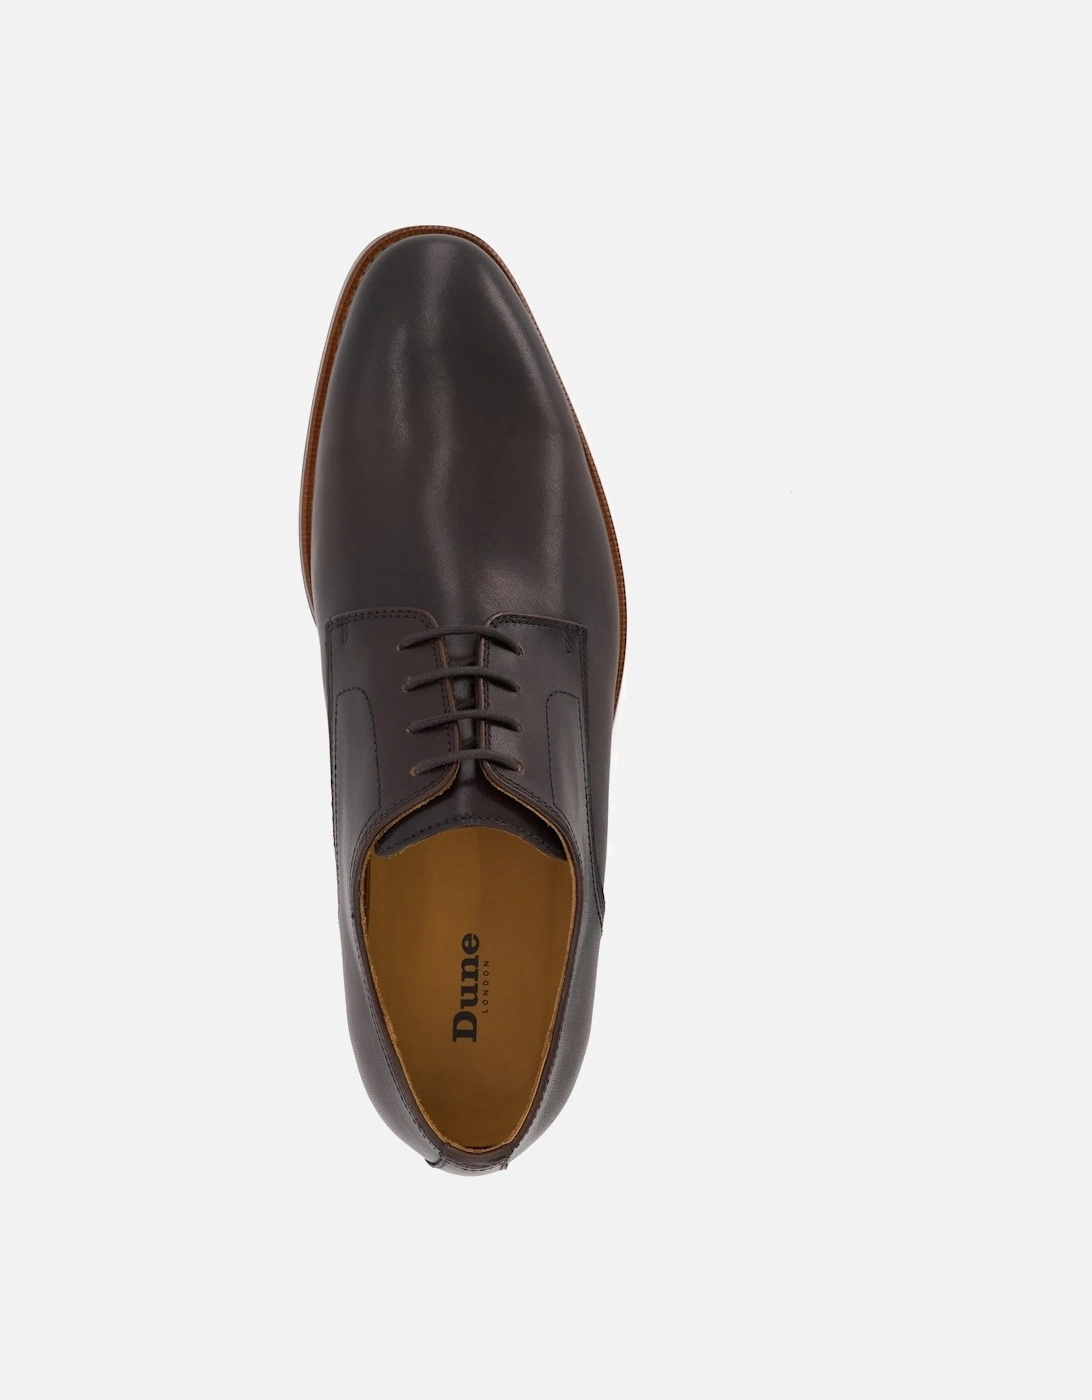 Mens Sinclairs - Smart-Casual Gibson Shoes